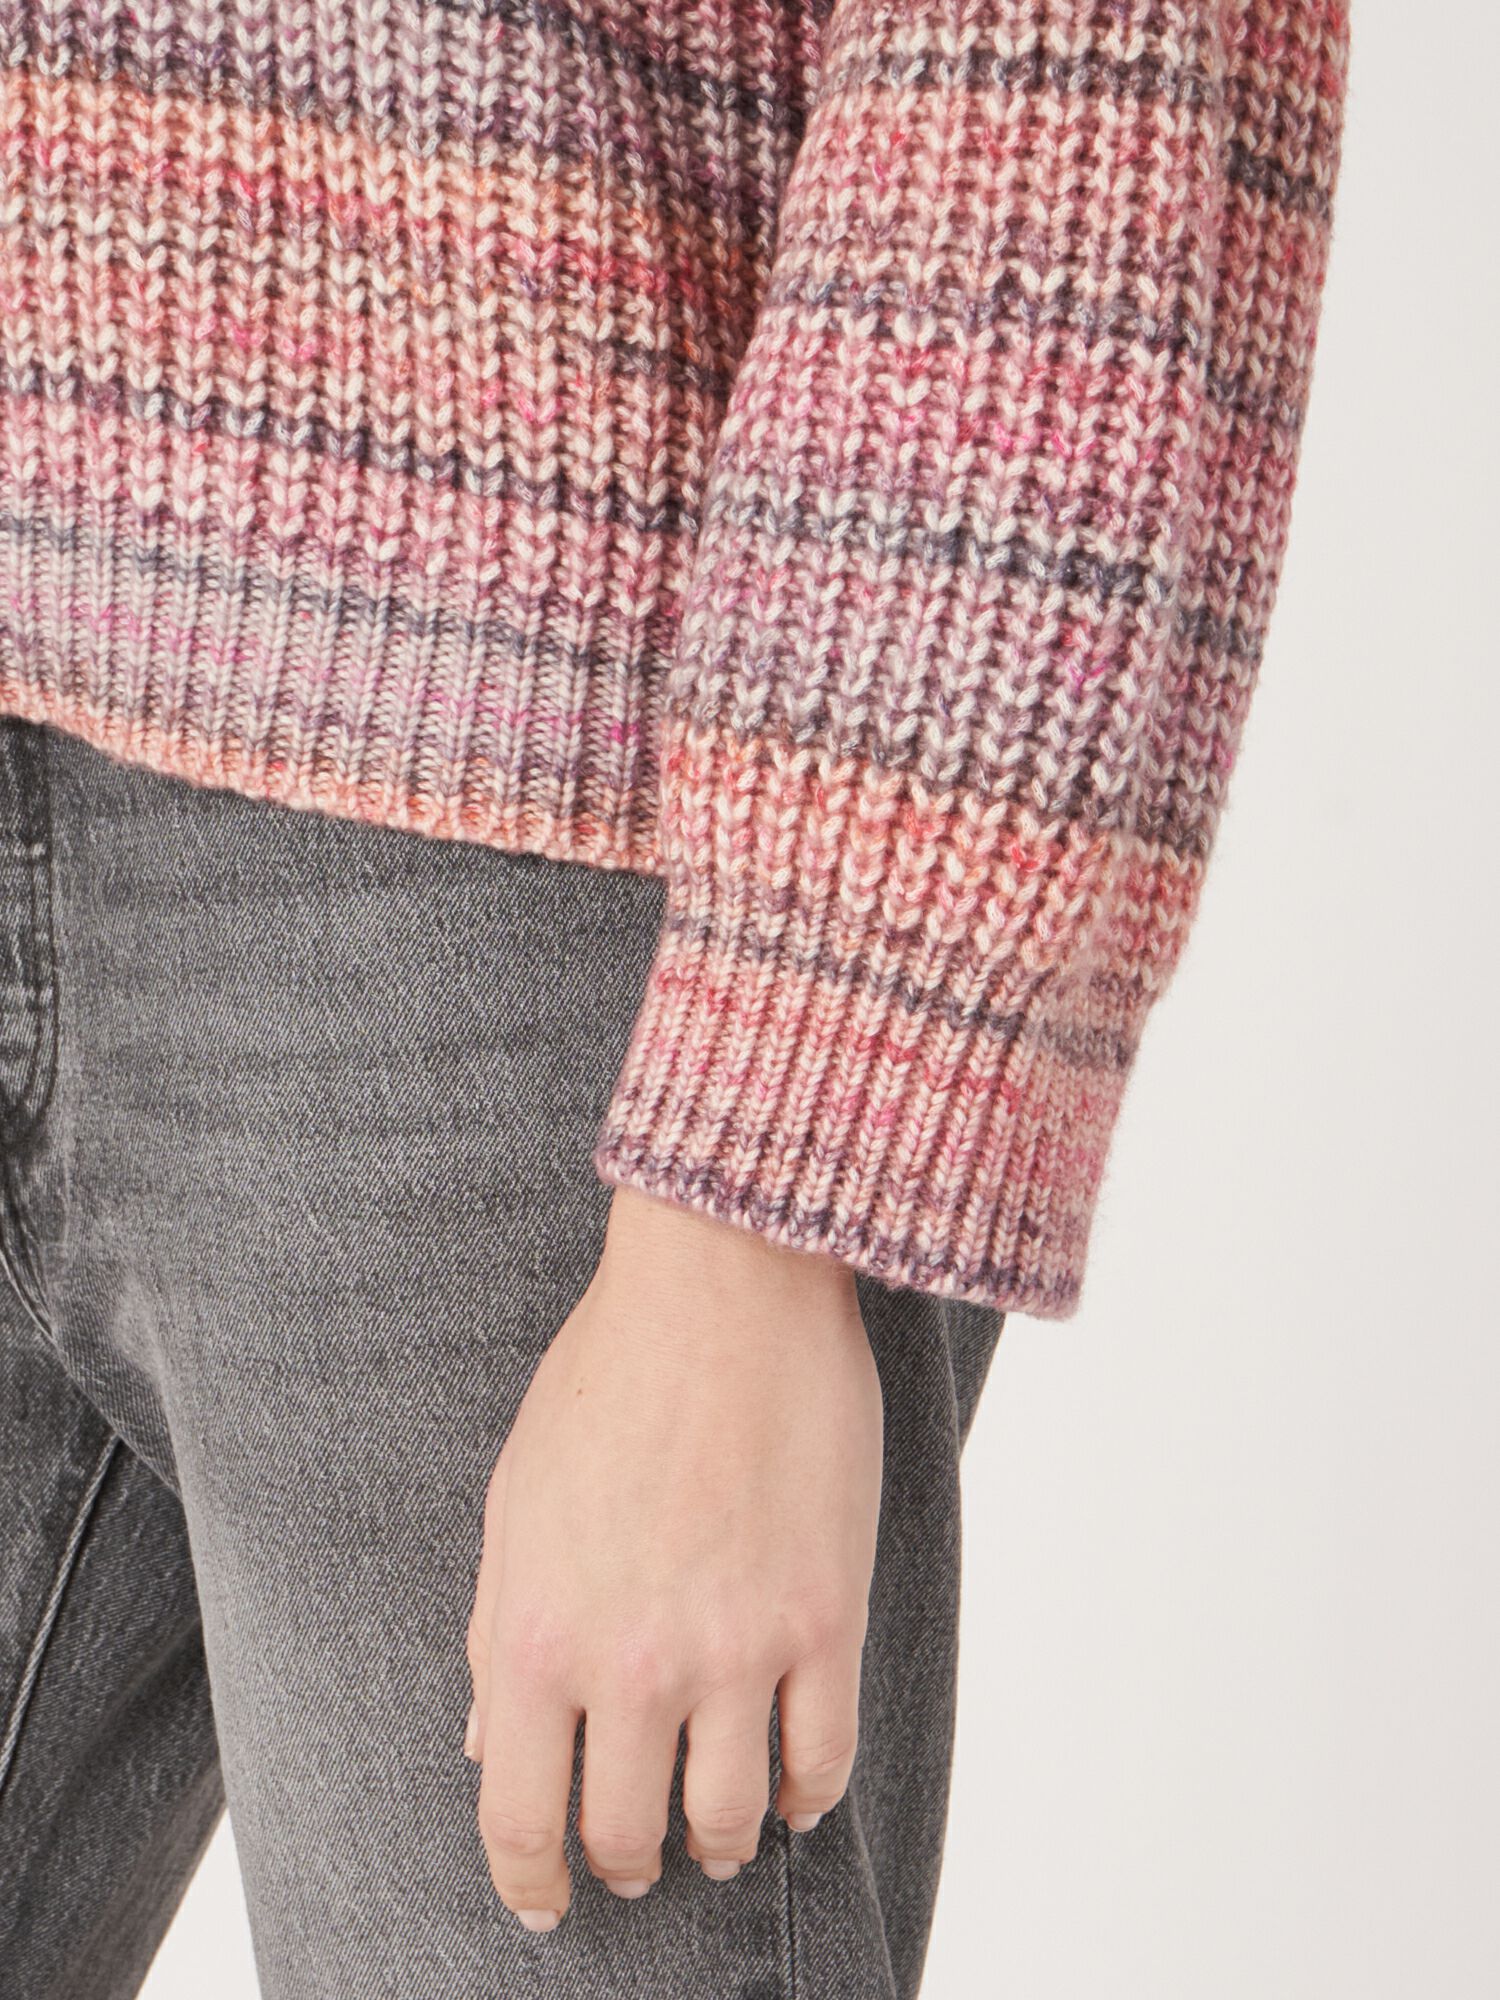 Space dye knit sweater with buttoned neckline